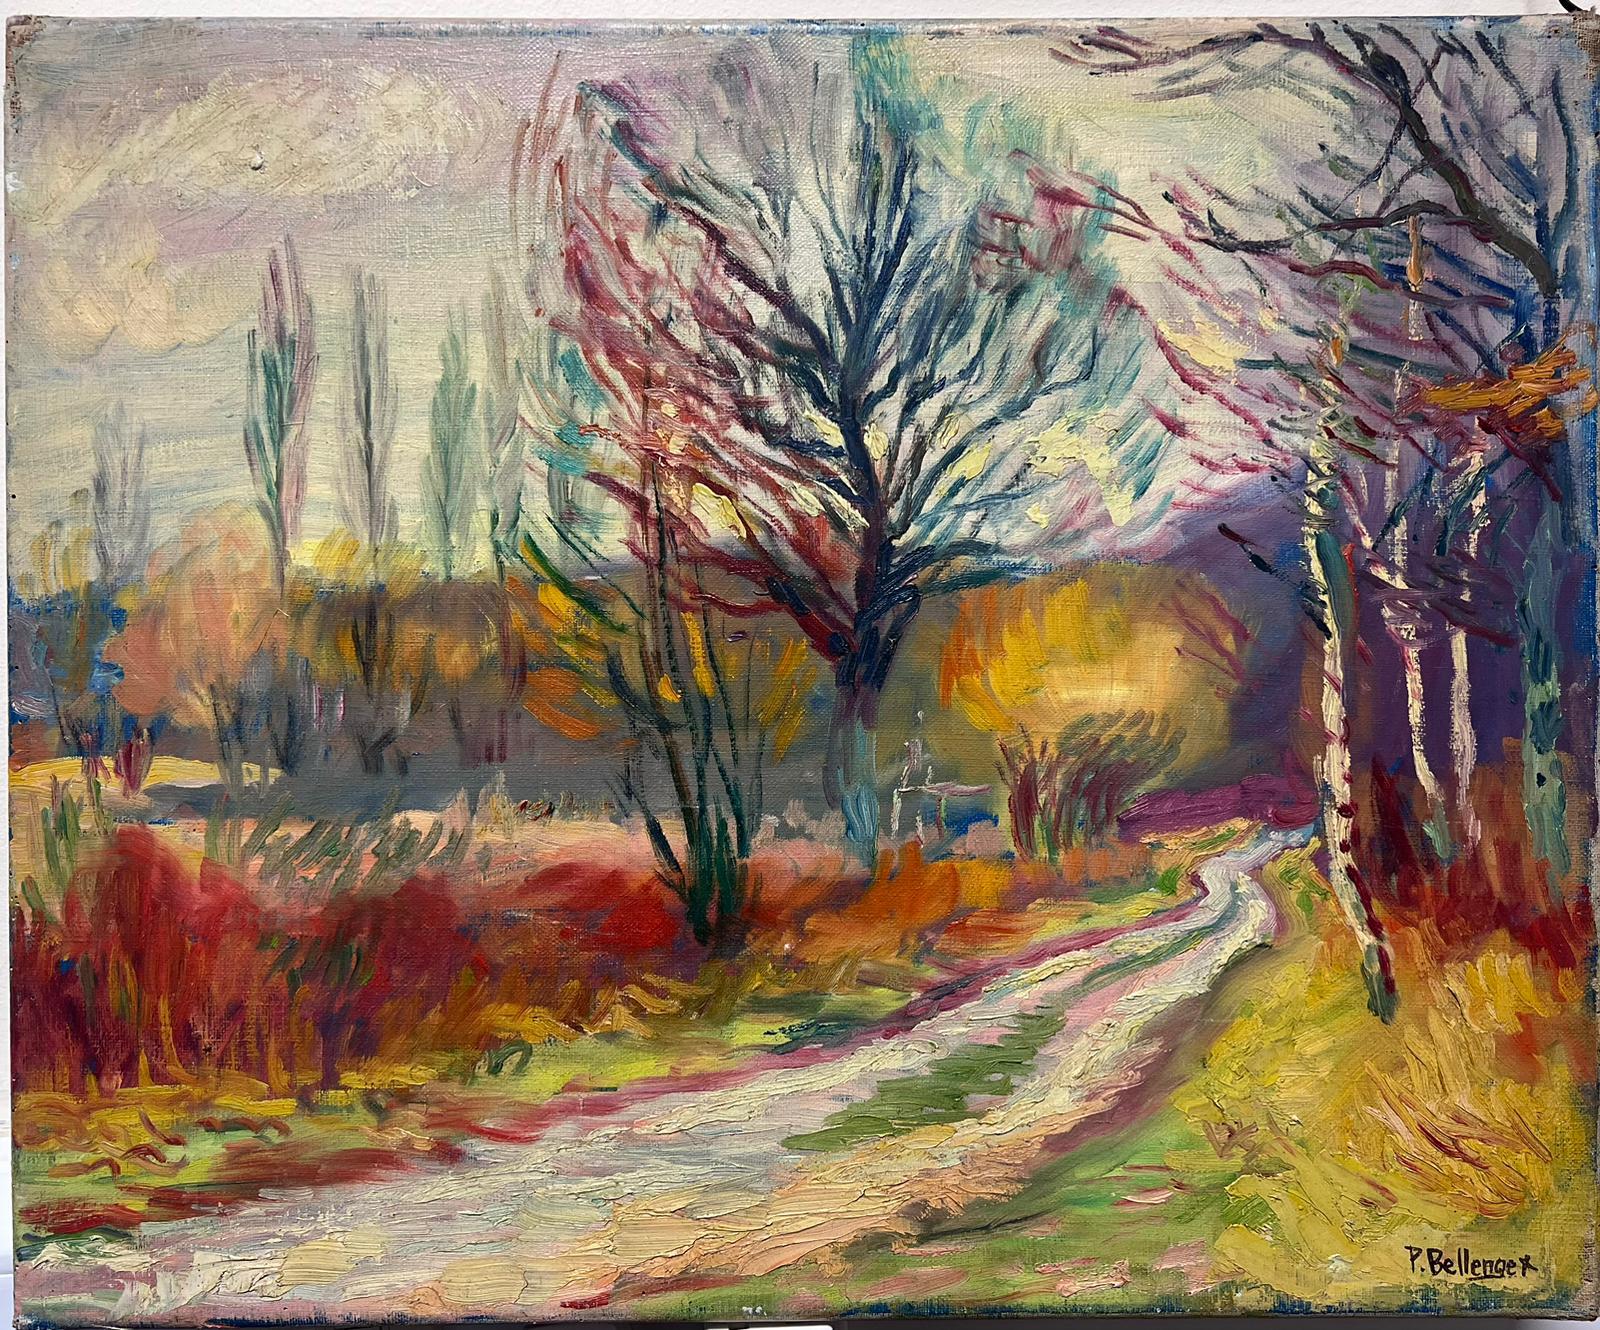 Autumn Landscape
by P. Bellenger, French 20th century impressionist painter
signed oil on canvas, unframed
canvas: 18 x 24 inches
provenance: private collection, France
condition: very good and sound condition